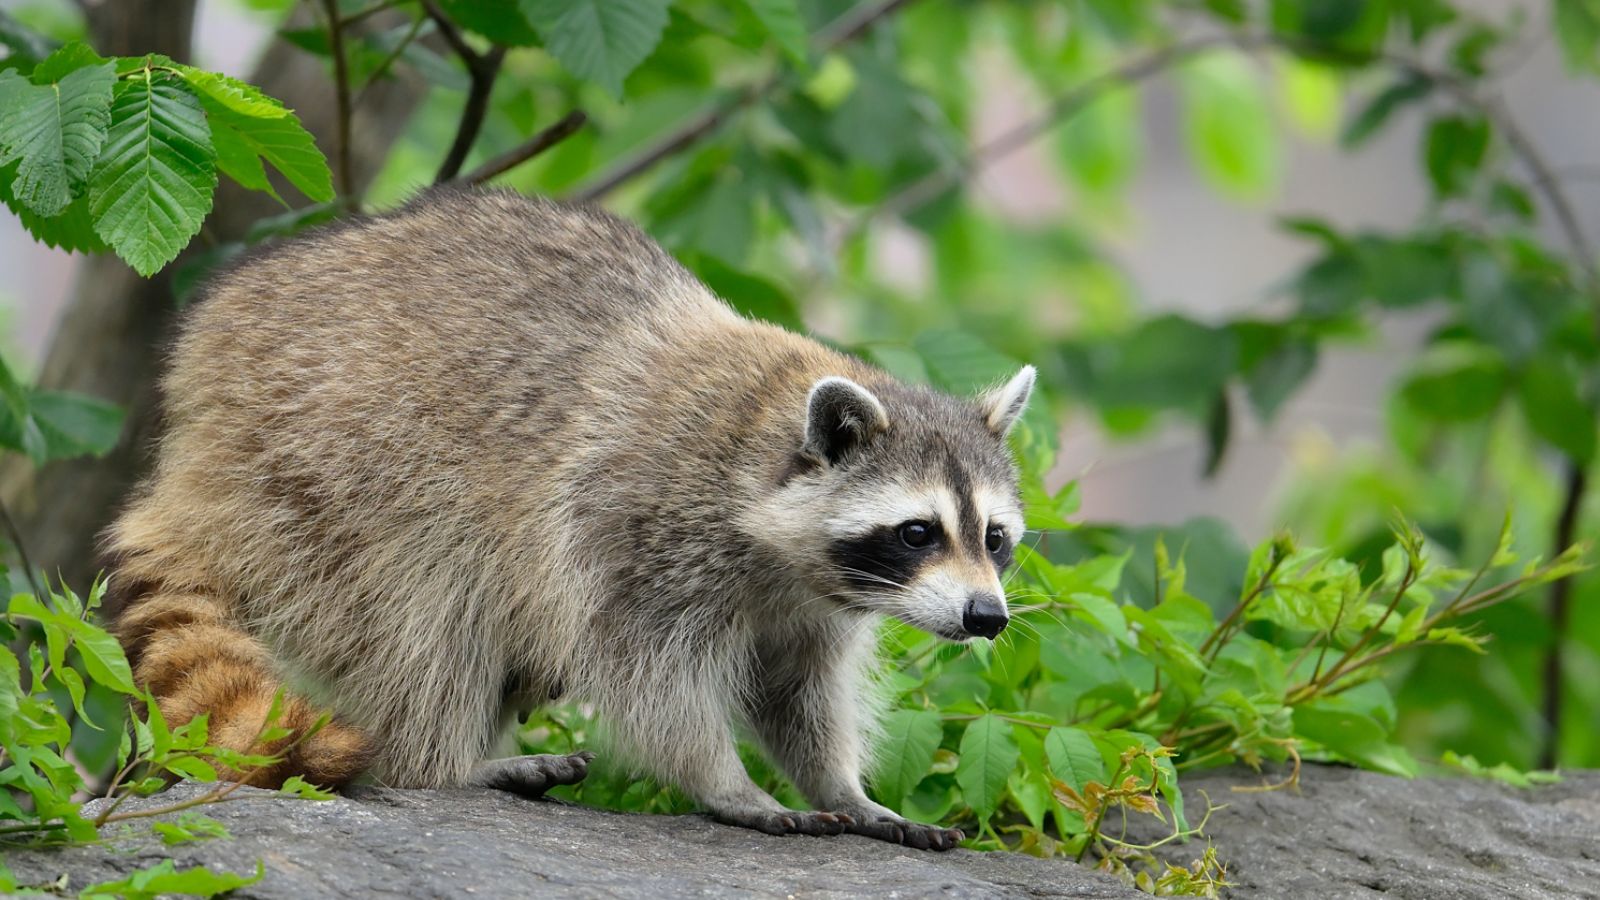 <p>Raccoons are small, furry, and cute, so it’s understandable that some people want to keep them as pets. However, their ownership is illegal in several states. Despite their adorable appearance, raccoons can be aggressive and carry dangerous diseases.</p>